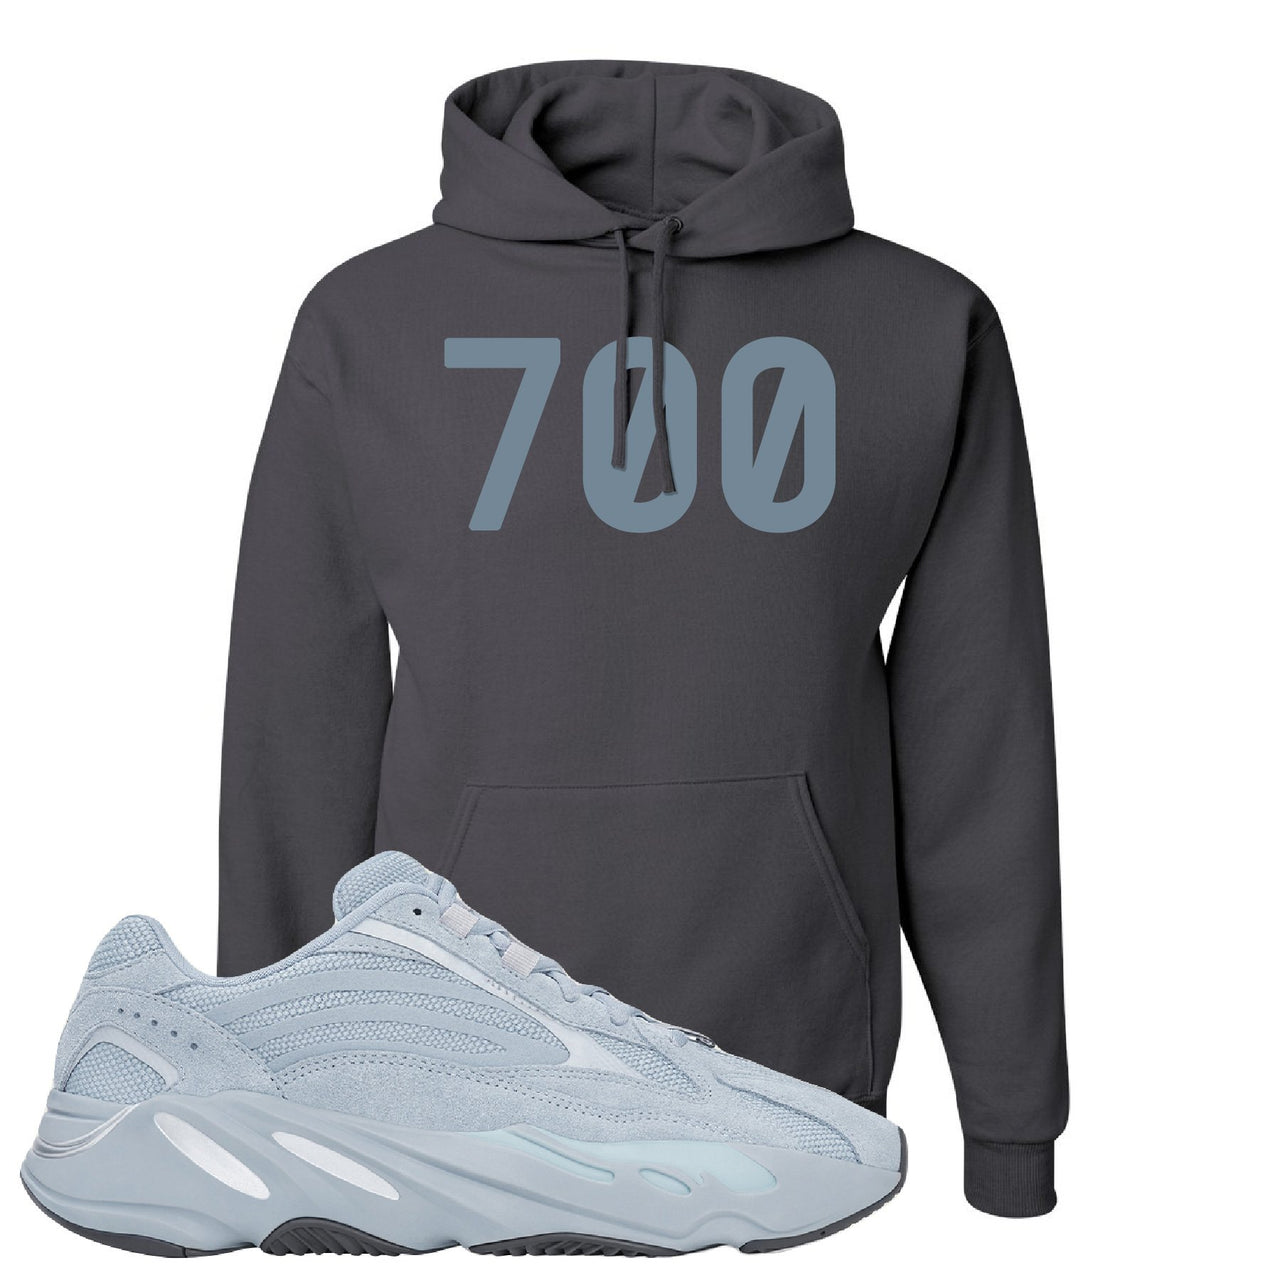 Yeezy Boost 700 V2 Hospital Blue 700 Sneaker Matching Charcoal Gray Pullover Hoodie